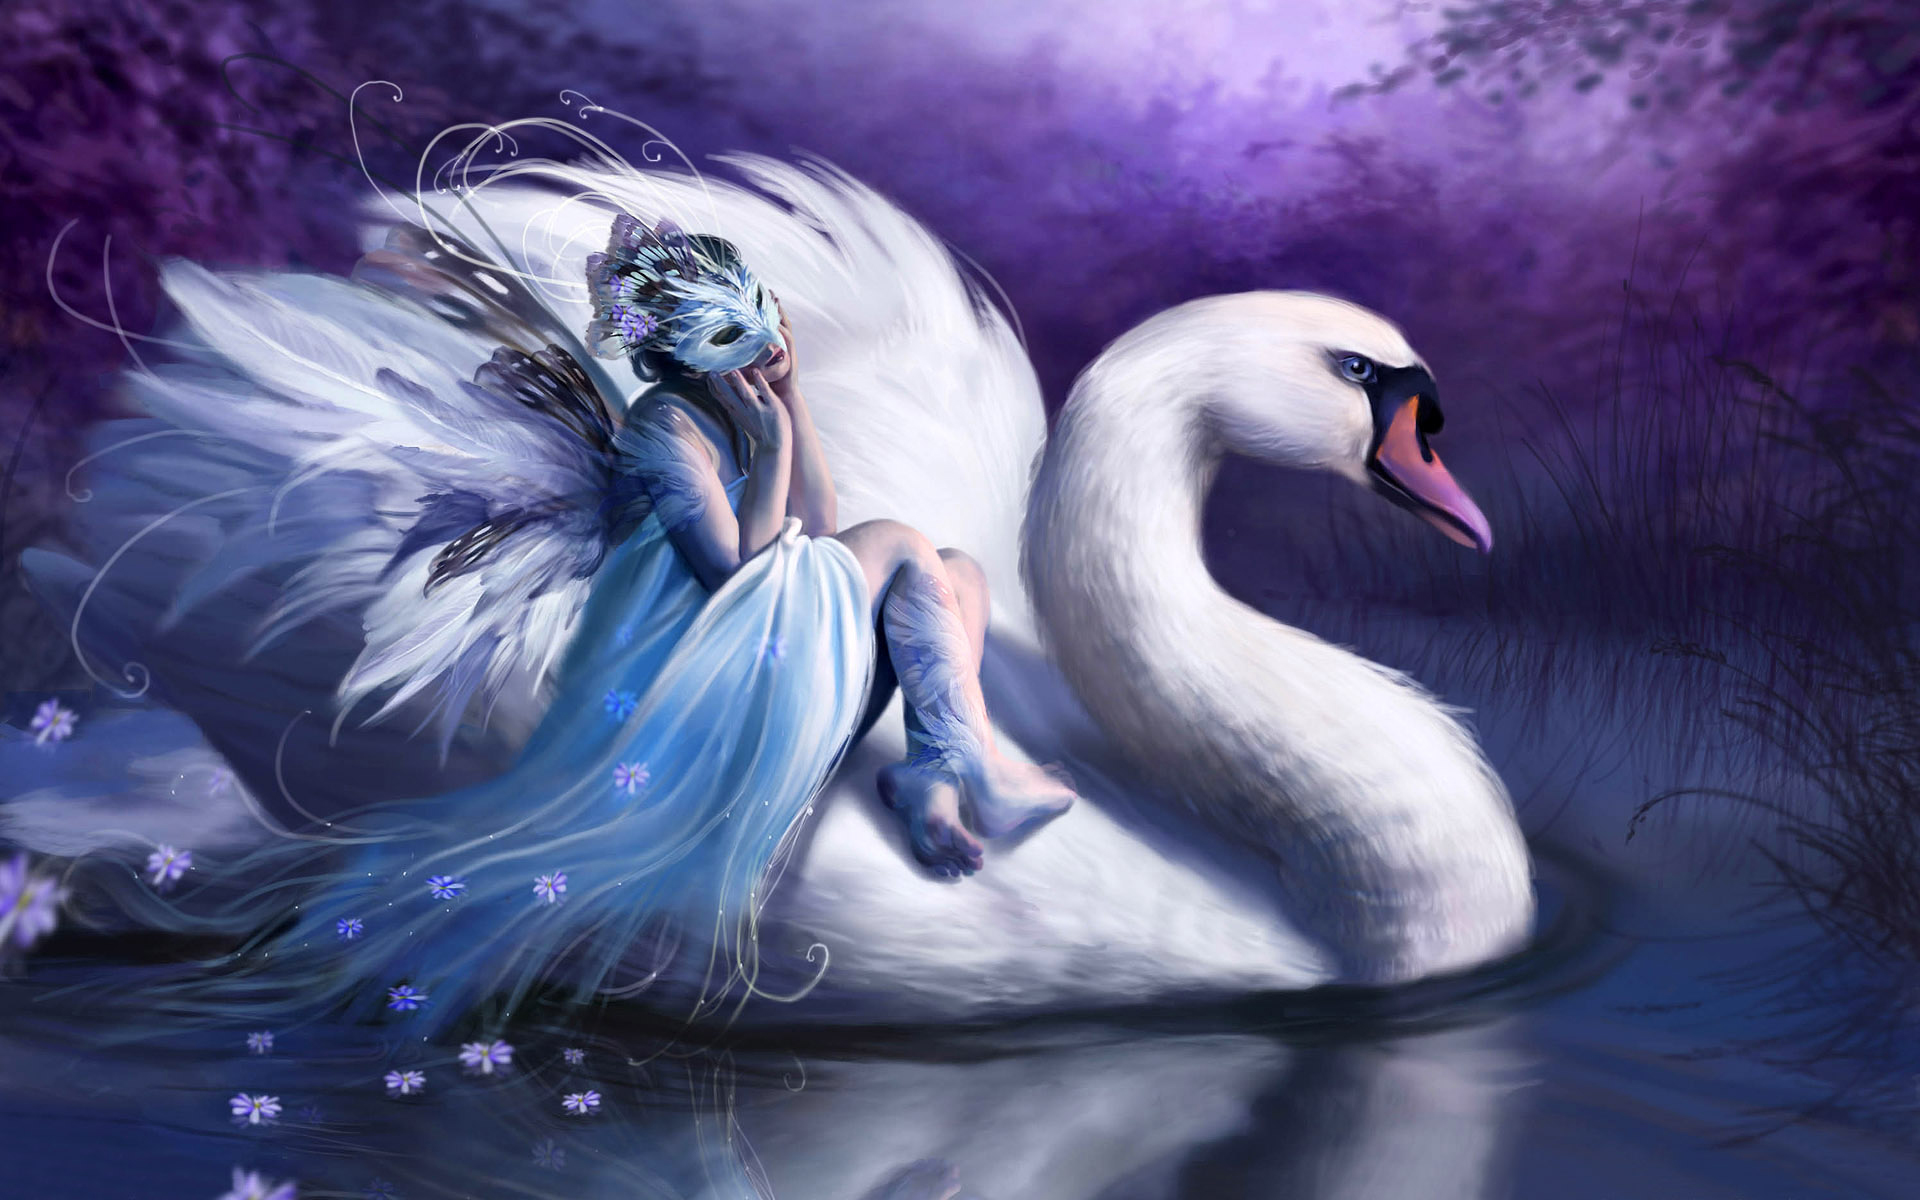 Masked Girl On A Swan Fantasy Wallpaper 1920x1200 3918 Wallpapers13